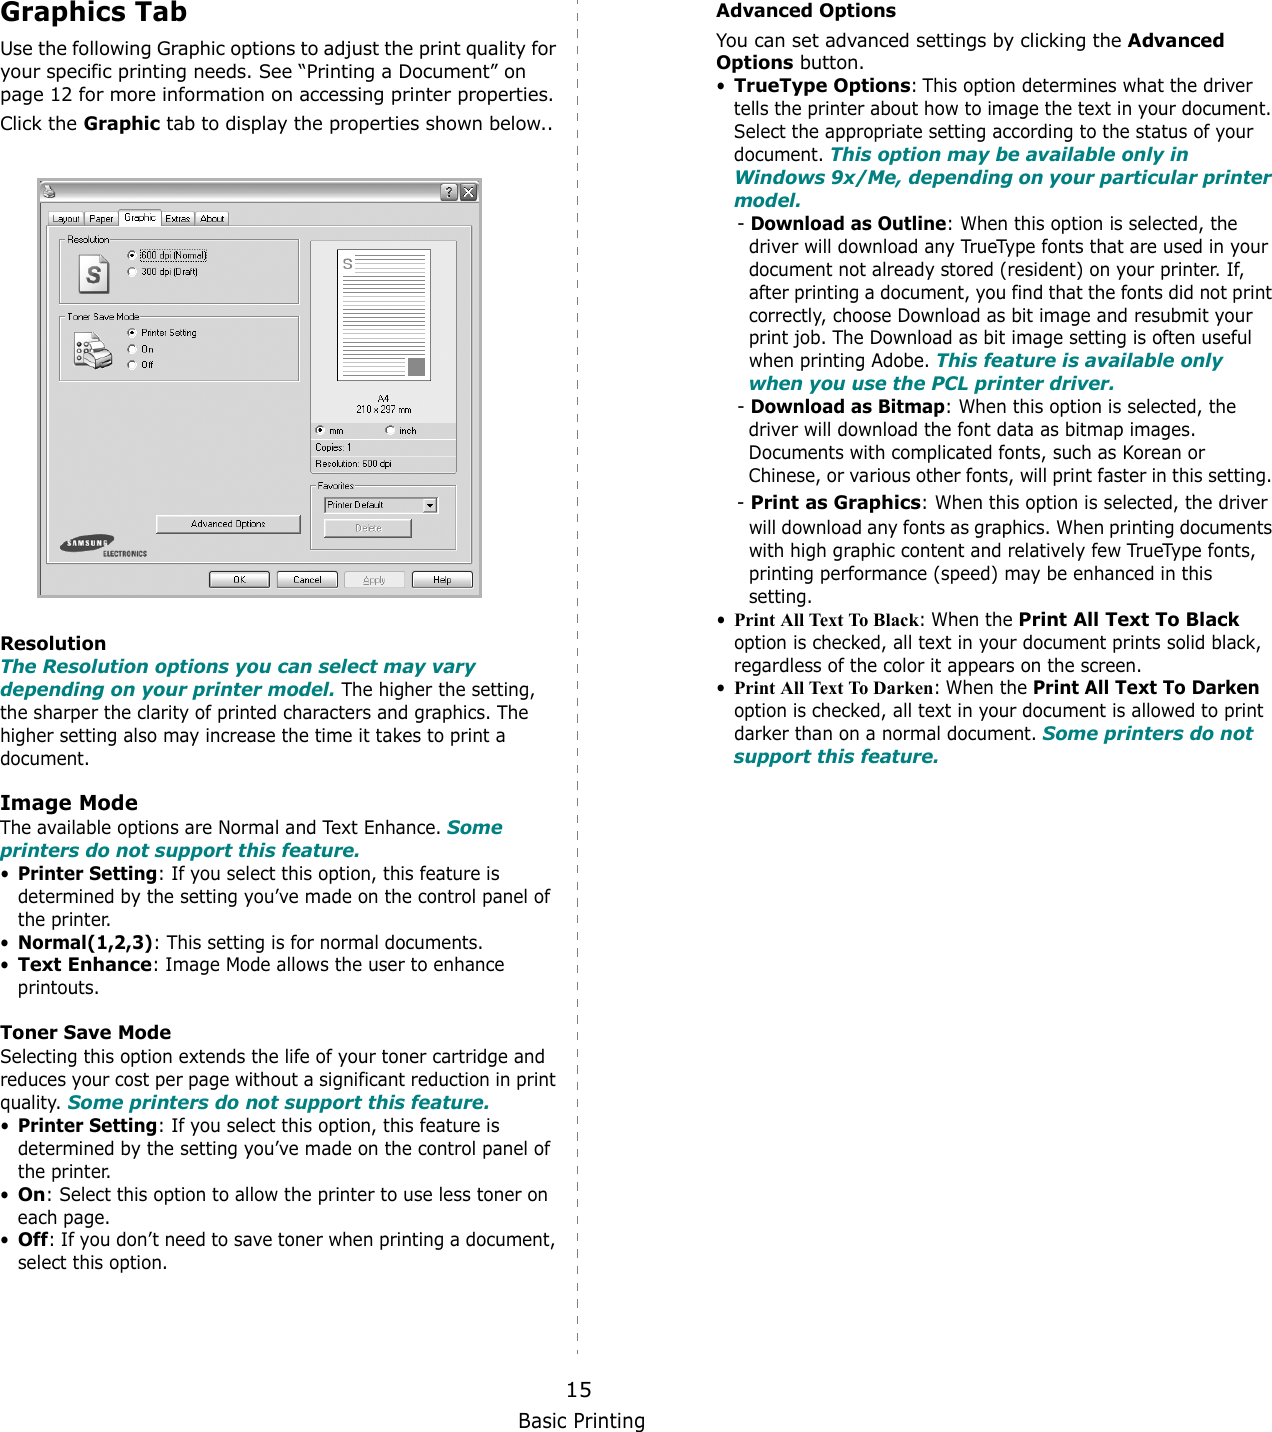 Basic Printing15Graphics TabUse the following Graphic options to adjust the print quality for your specific printing needs. See “Printing a Document” on page 12 for more information on accessing printer properties. Click the Graphic tab to display the properties shown below..   ResolutionThe Resolution options you can select may vary depending on your printer model. The higher the setting, the sharper the clarity of printed characters and graphics. The higher setting also may increase the time it takes to print a document. Image ModeThe available options are Normal and Text Enhance. Some printers do not support this feature. •Printer Setting: If you select this option, this feature is determined by the setting you’ve made on the control panel of the printer. •Normal(1,2,3): This setting is for normal documents.•Text Enhance: Image Mode allows the user to enhance printouts. Toner Save ModeSelecting this option extends the life of your toner cartridge and reduces your cost per page without a significant reduction in print quality. Some printers do not support this feature. •Printer Setting: If you select this option, this feature is determined by the setting you’ve made on the control panel of the printer. •On: Select this option to allow the printer to use less toner on each page.•Off: If you don’t need to save toner when printing a document, select this option.Advanced OptionsYou can set advanced settings by clicking the Advanced Options button. •TrueType Options: This option determines what the driver tells the printer about how to image the text in your document. Select the appropriate setting according to the status of your document. This option may be available only in Windows 9x/Me, depending on your particular printer model.- Download as Outline: When this option is selected, the driver will download any TrueType fonts that are used in your document not already stored (resident) on your printer. If, after printing a document, you find that the fonts did not print correctly, choose Download as bit image and resubmit your print job. The Download as bit image setting is often useful when printing Adobe. This feature is available only when you use the PCL printer driver.- Download as Bitmap: When this option is selected, the    driver will download the font data as bitmap images.    Documents with complicated fonts, such as Korean or    Chinese, or various other fonts, will print faster in this setting. - Print as Graphics: When this option is selected, the driver will download any fonts as graphics. When printing documents with high graphic content and relatively few TrueType fonts, printing performance (speed) may be enhanced in this setting.•Print All Text To Black: When the Print All Text To Black option is checked, all text in your document prints solid black, regardless of the color it appears on the screen. •Print All Text To Darken: When the Print All Text To Darken option is checked, all text in your document is allowed to print darker than on a normal document. Some printers do not support this feature. 